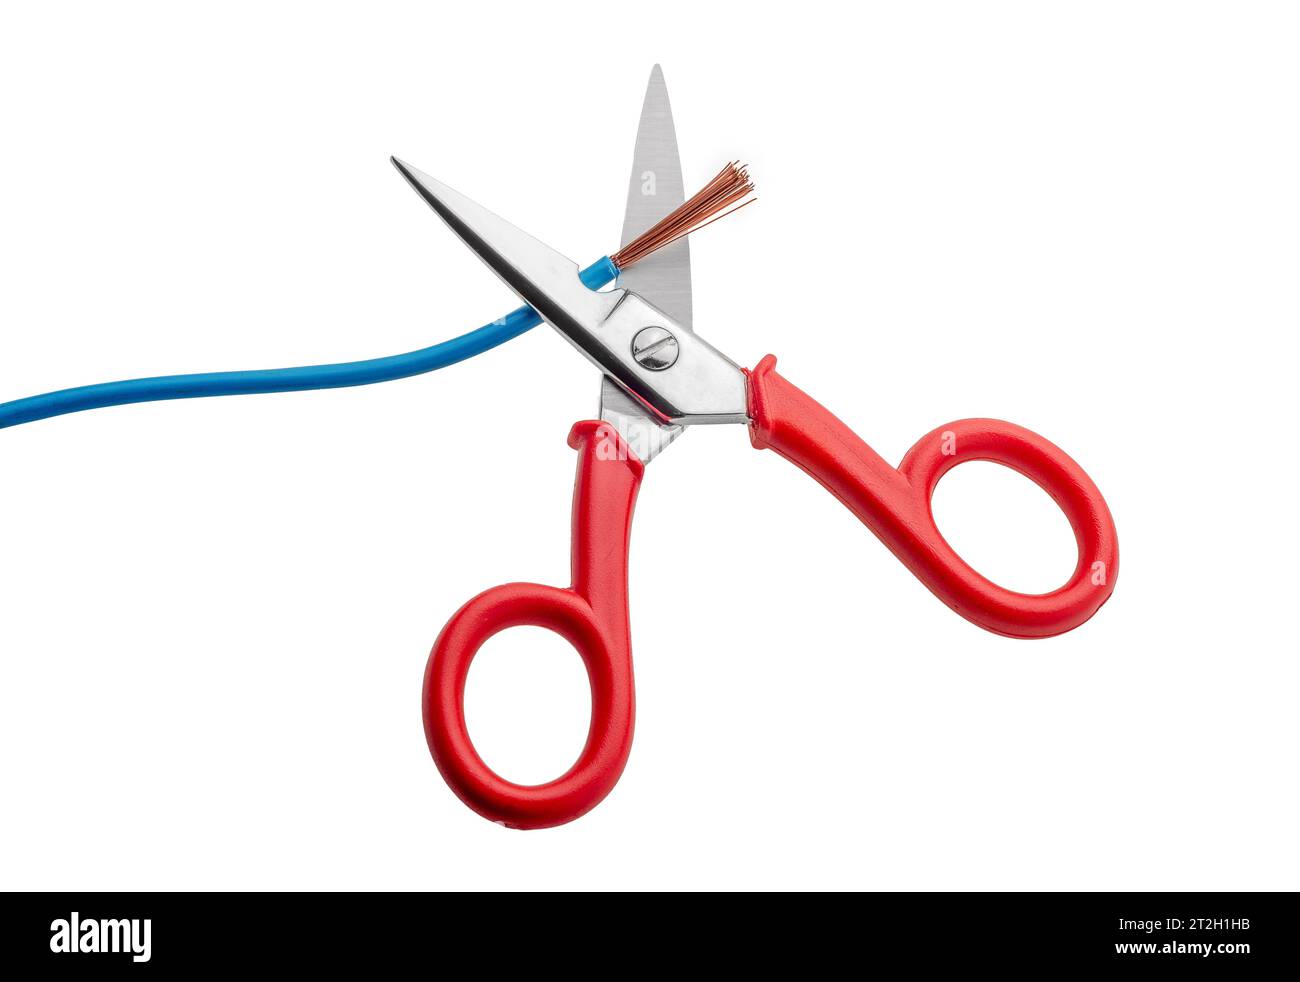 Electrician scissors cutting cable with exposed copper wires, isolated on white with clipping path included Stock Photo